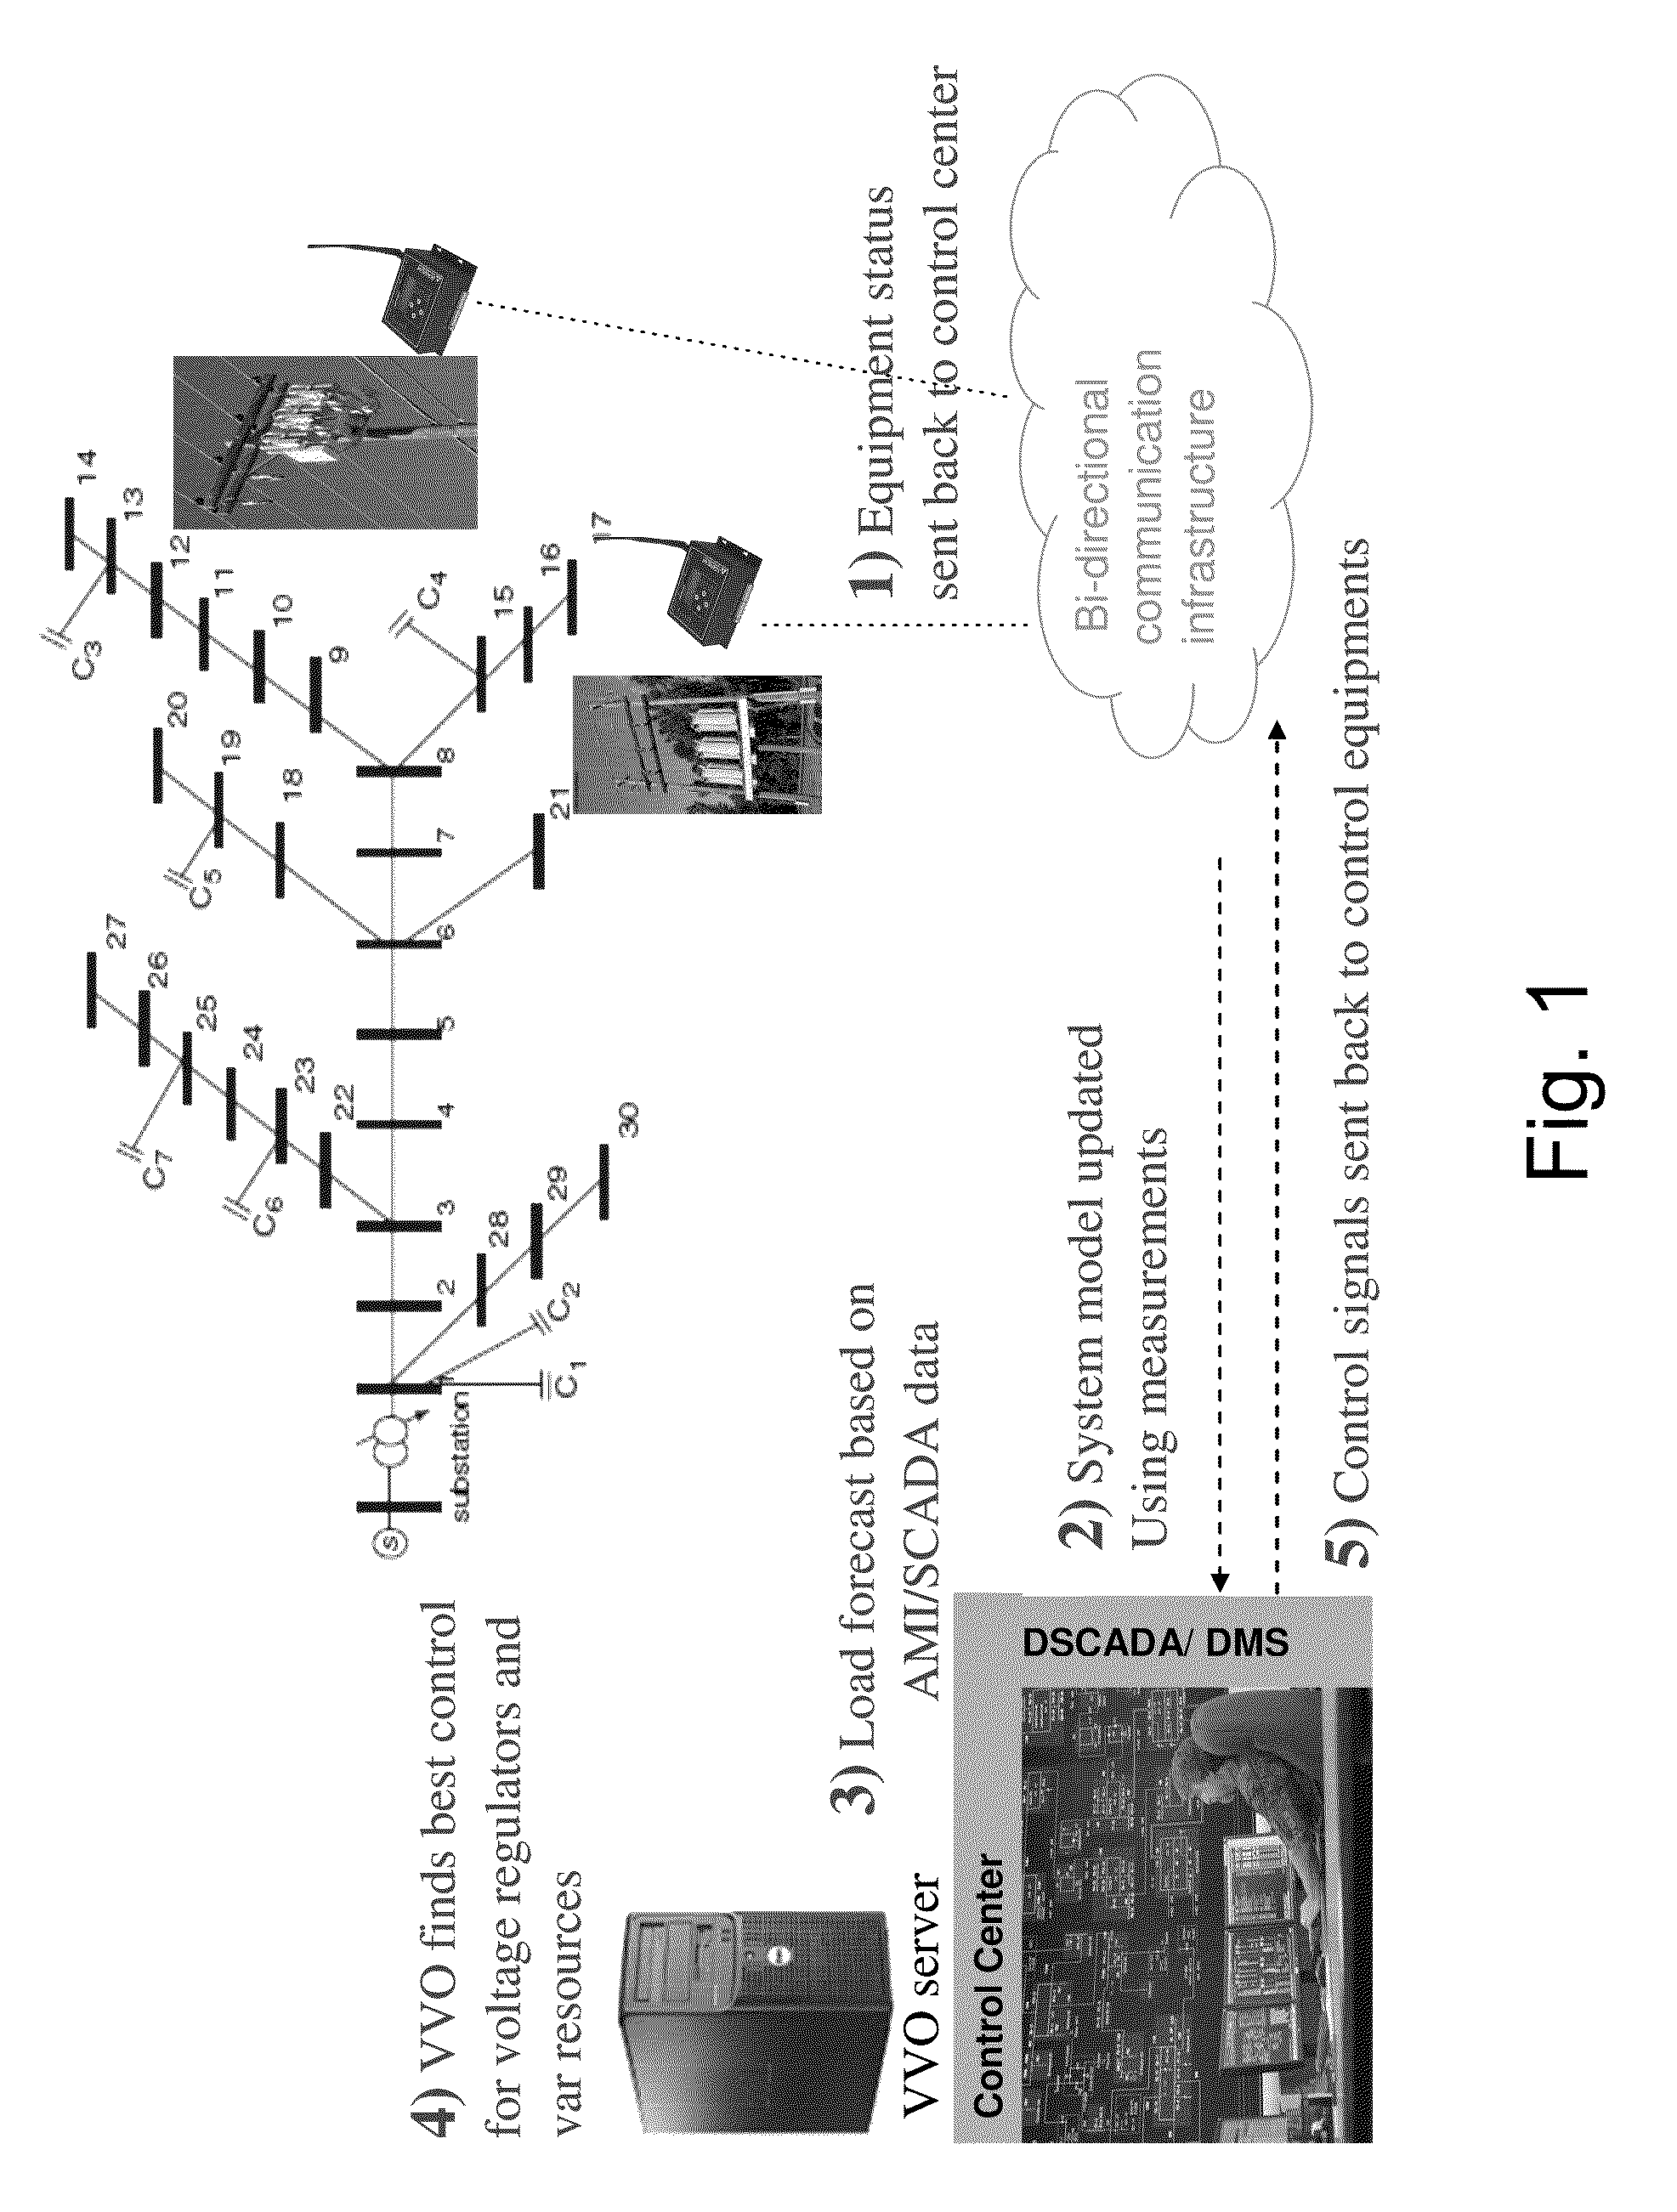 Integrated voltage and var optimization process for a distribution system